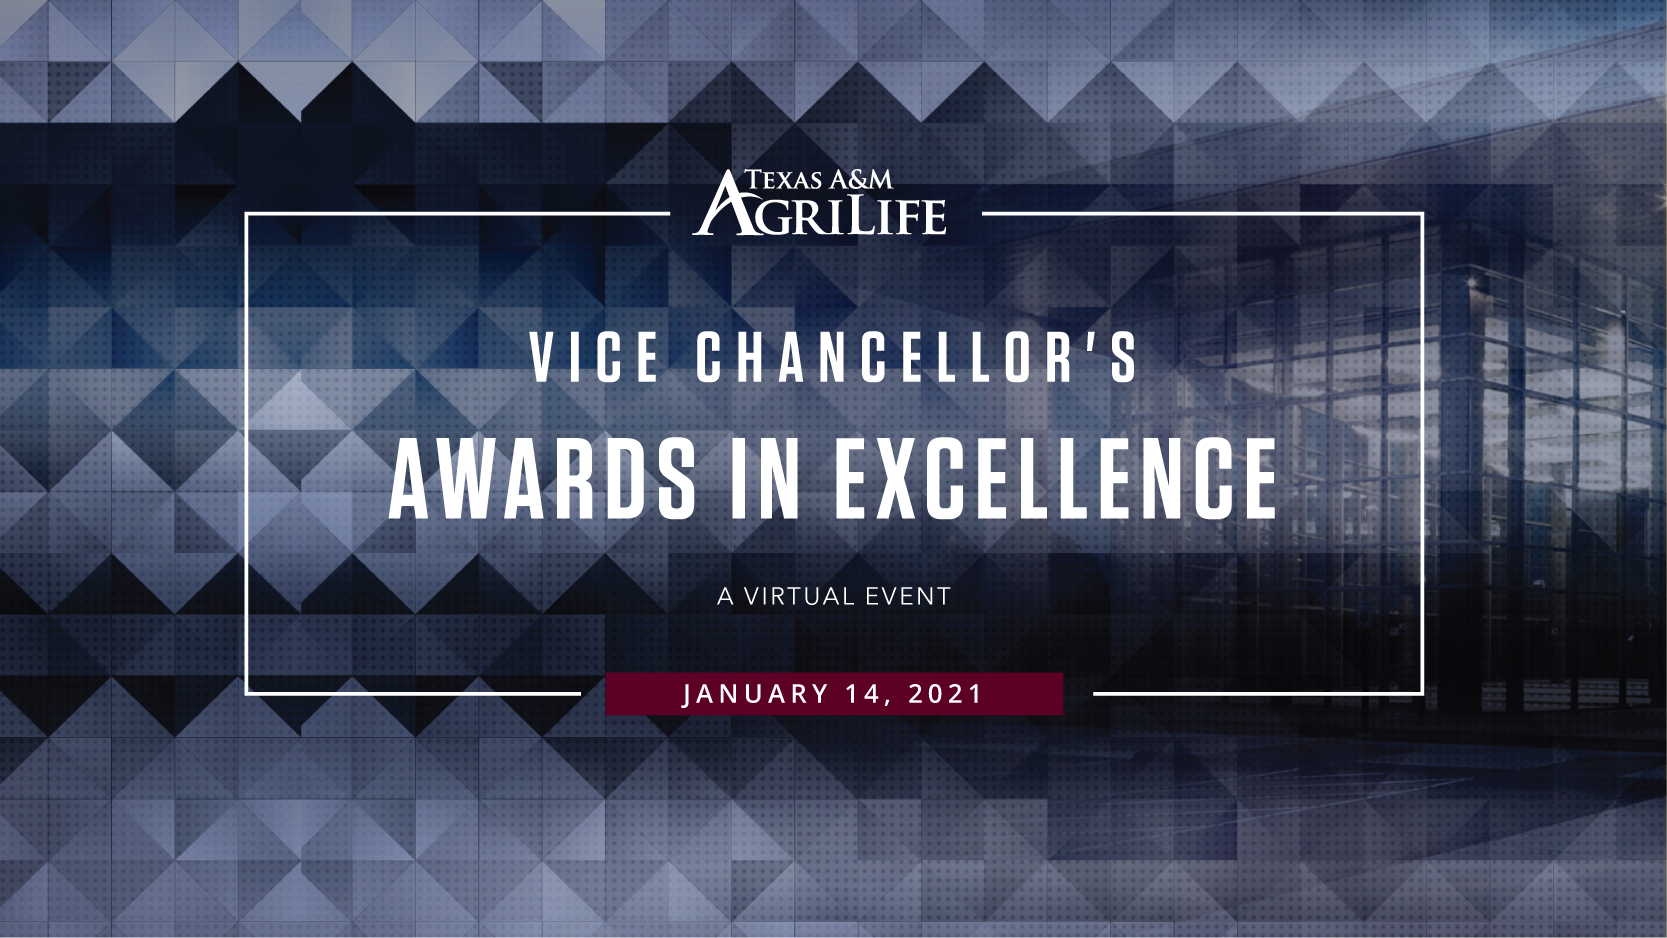 Vice Chancellor Award in Excellence graphic